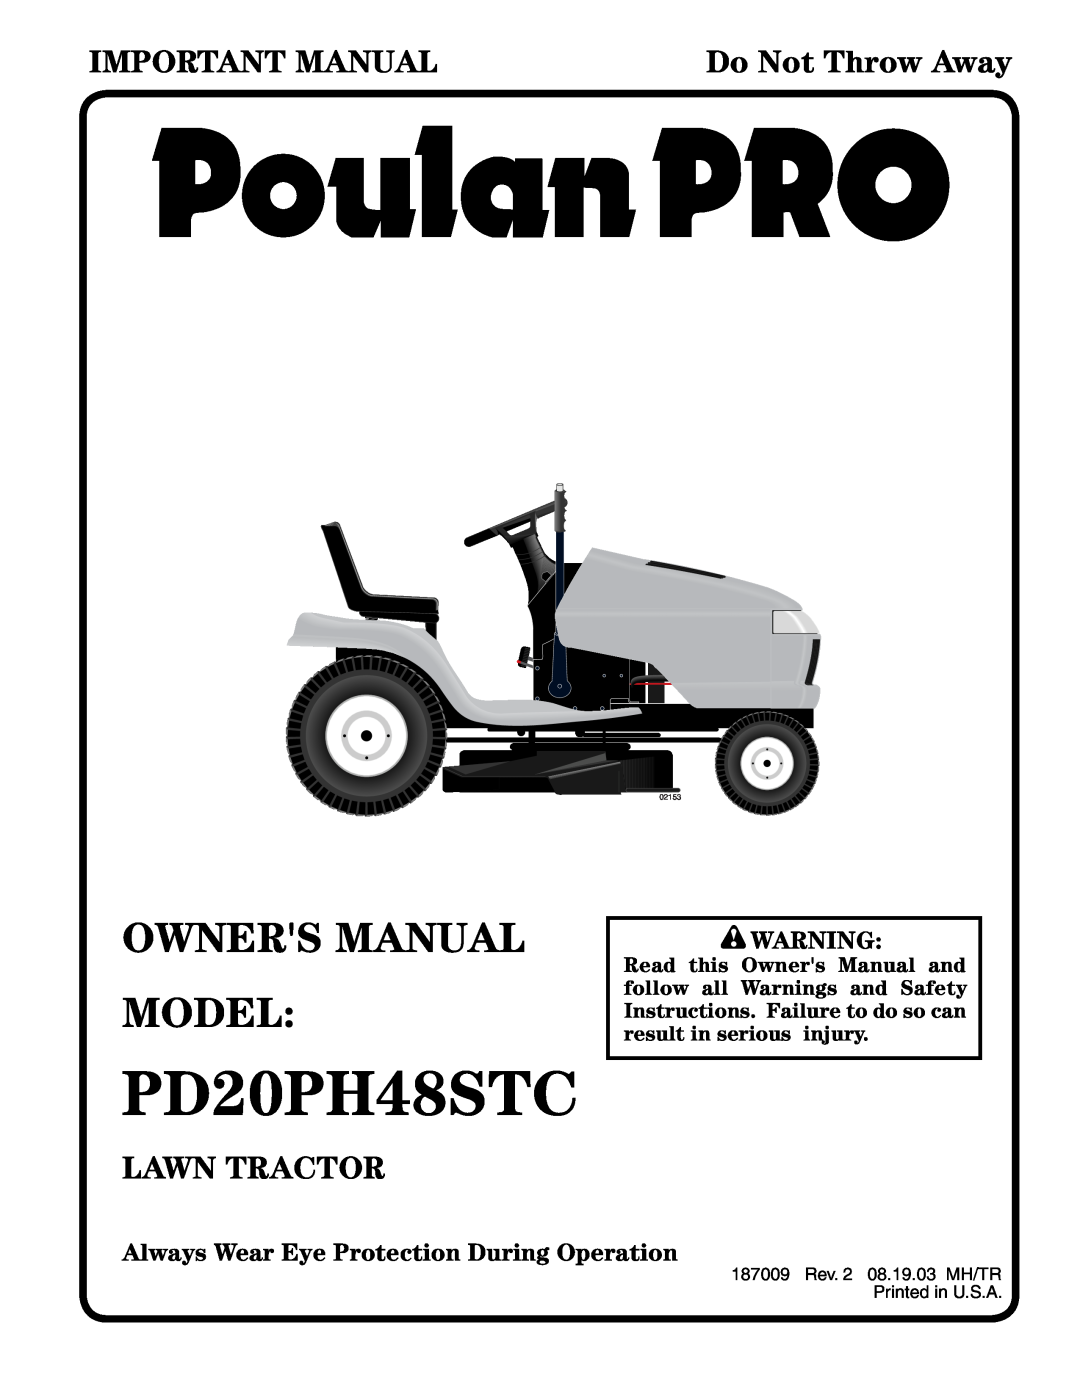 Poulan 187009 owner manual Always Wear Eye Protection During Operation, PD20PH48STC, Important Manual, Lawn Tractor, 02153 